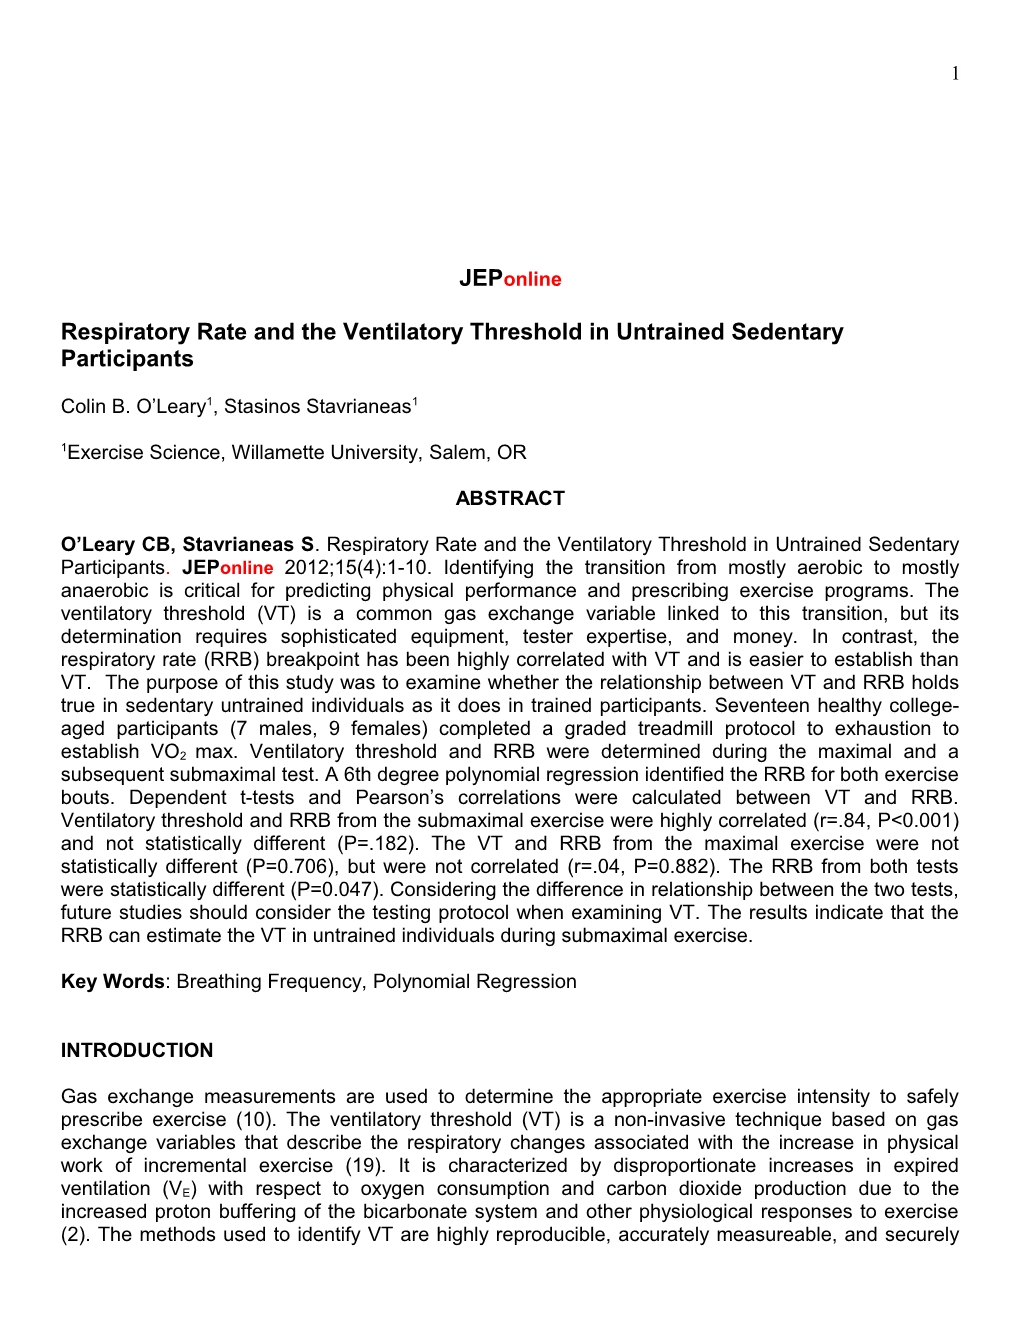 Respiratory Rate and the Ventilatory Threshold in Untrained Sedentary Participants